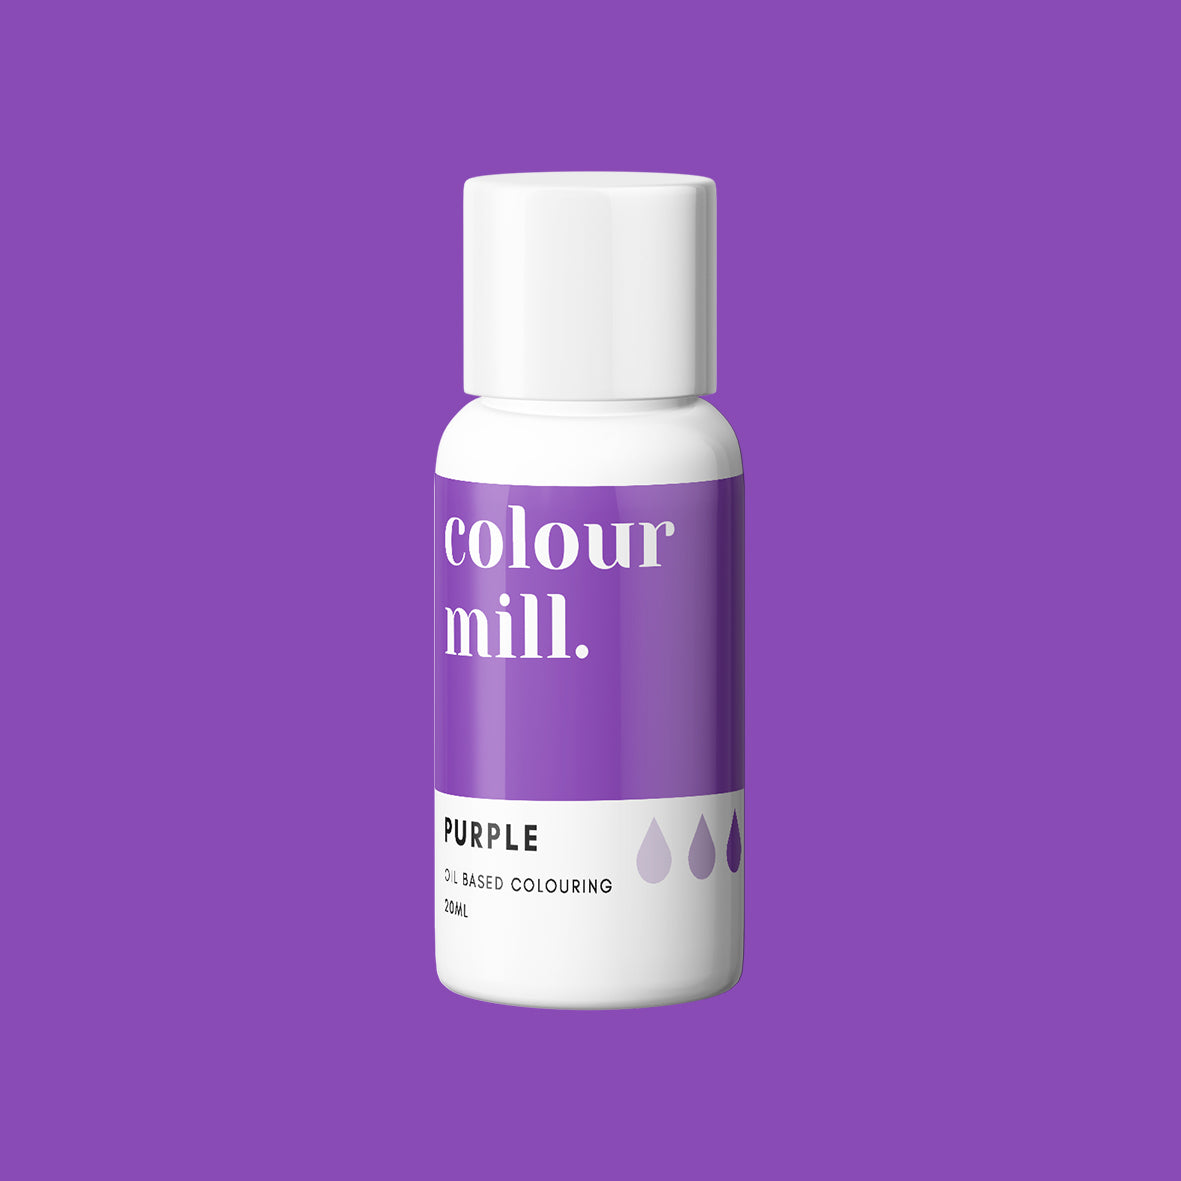 PURPLE oil based concentrated icing colouring 20ml